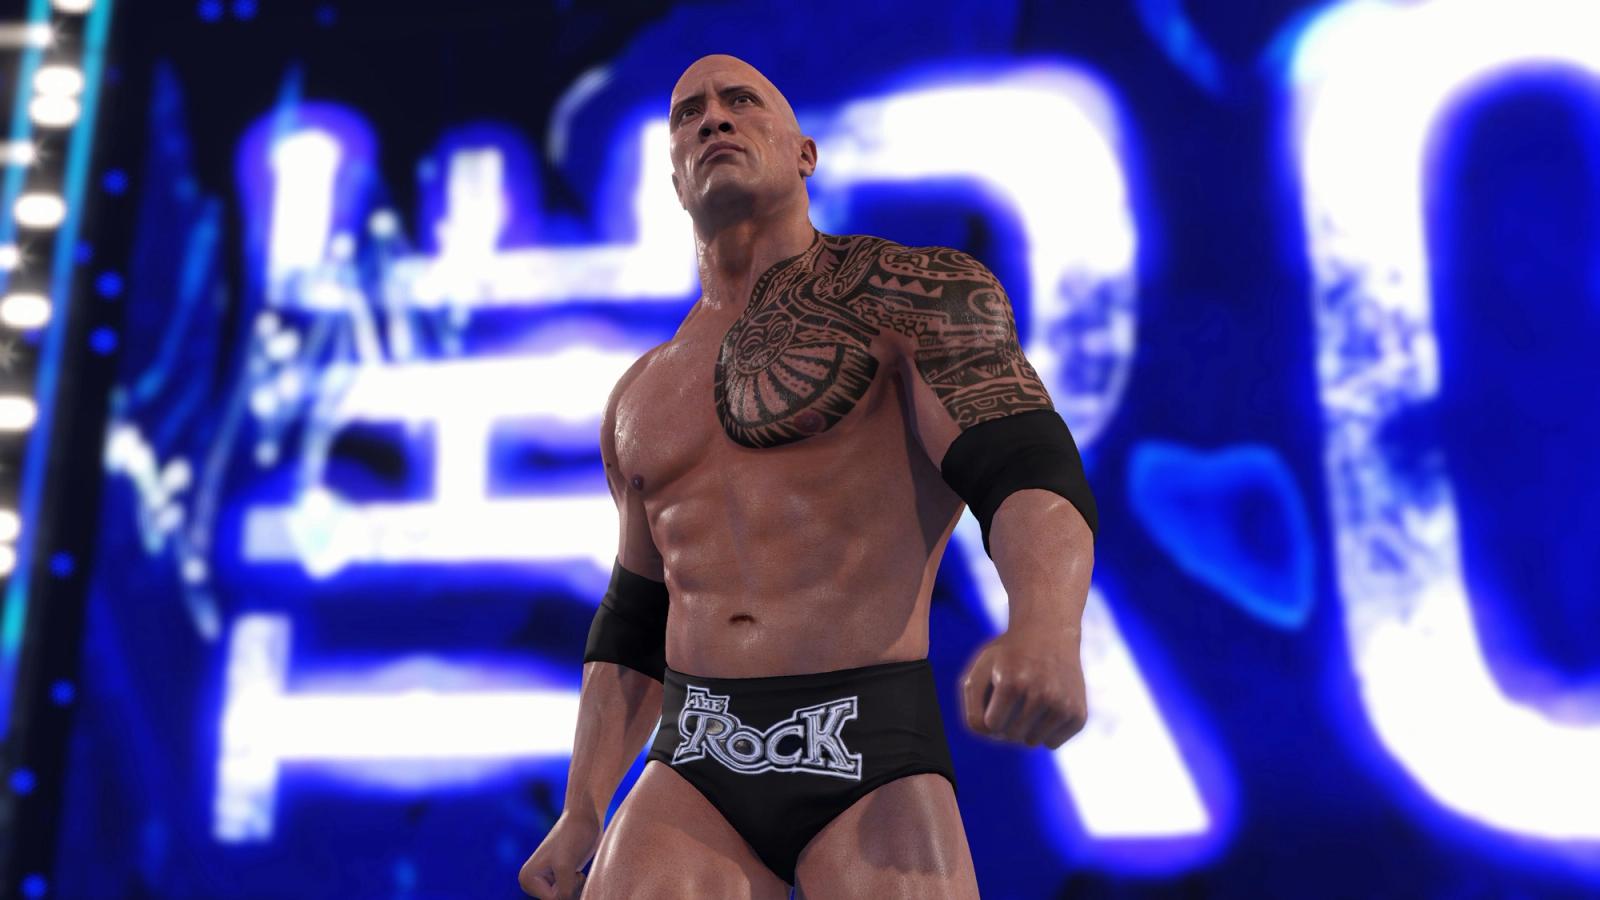 The Rock walks into the ring in WWE 2K22.